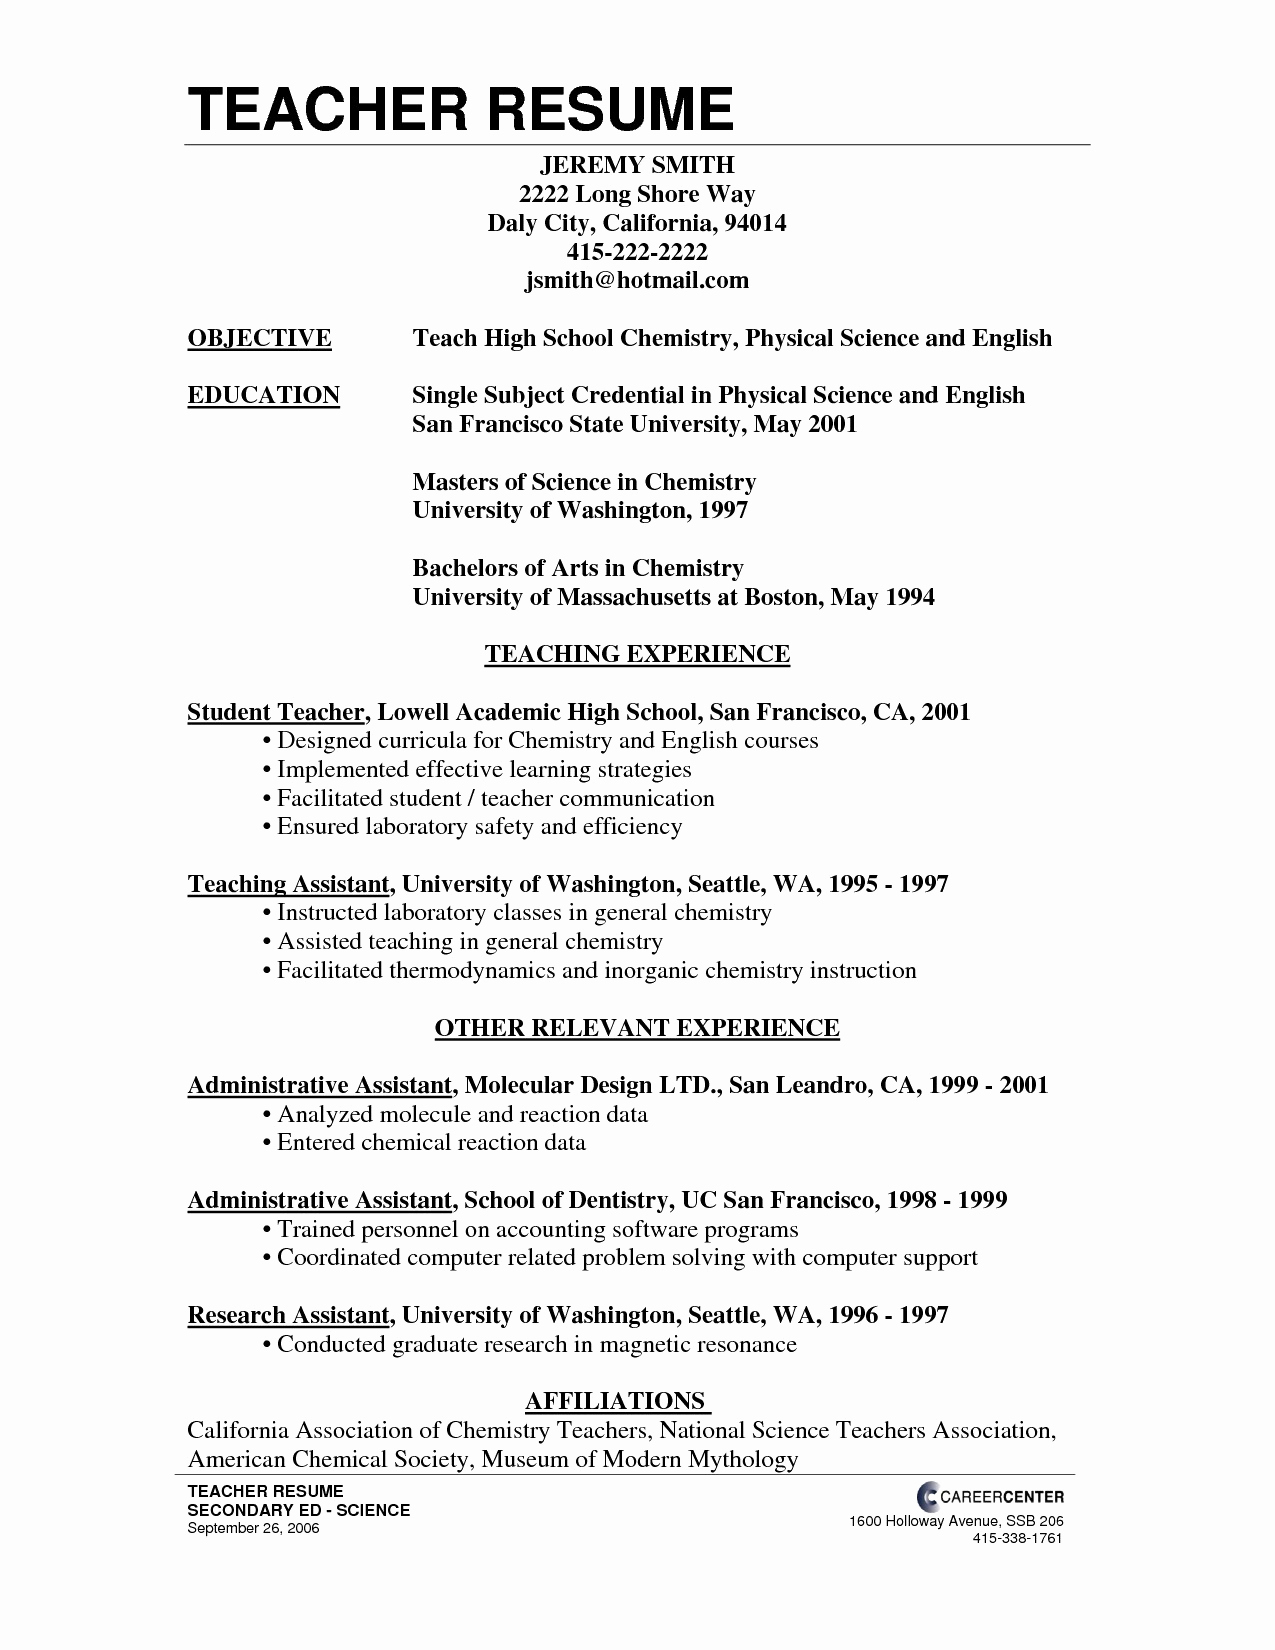 Free Cover Letter Template Word - Resume Templates Word Free New Free Cover Letter Templates Examples